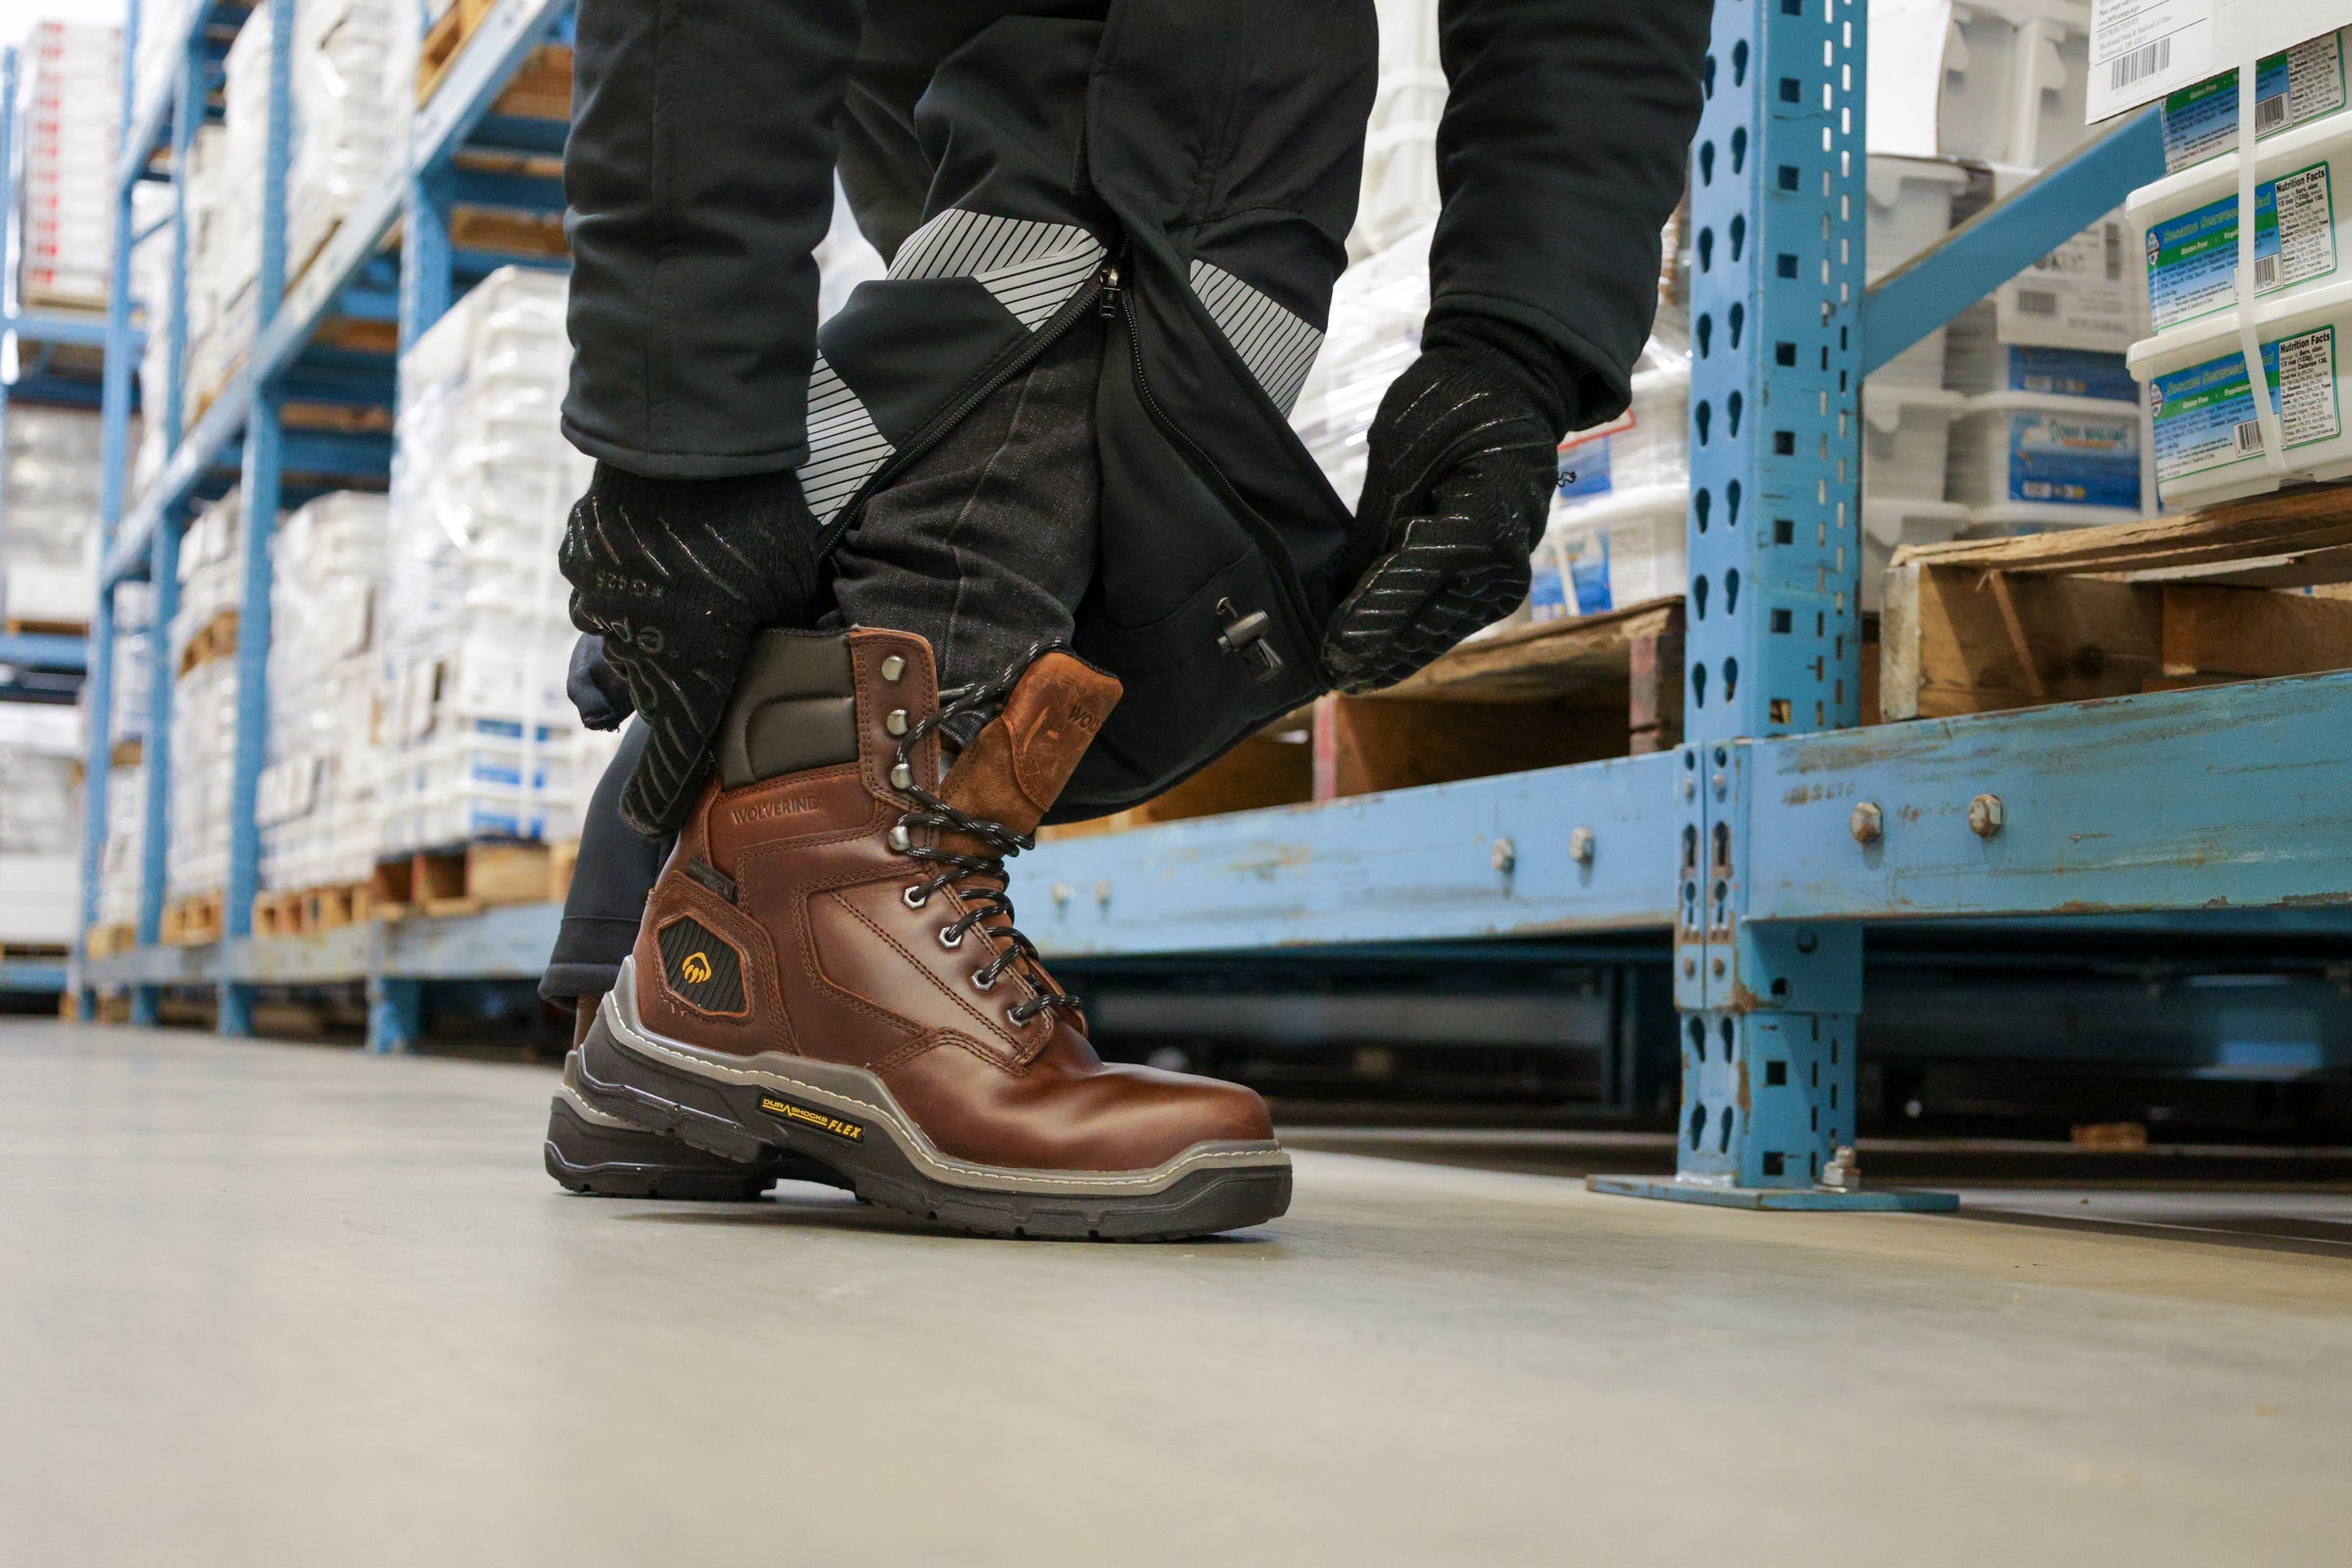 Epik Workwear's Raider Insulated Boot for Freezer and Cold Storage Jobs